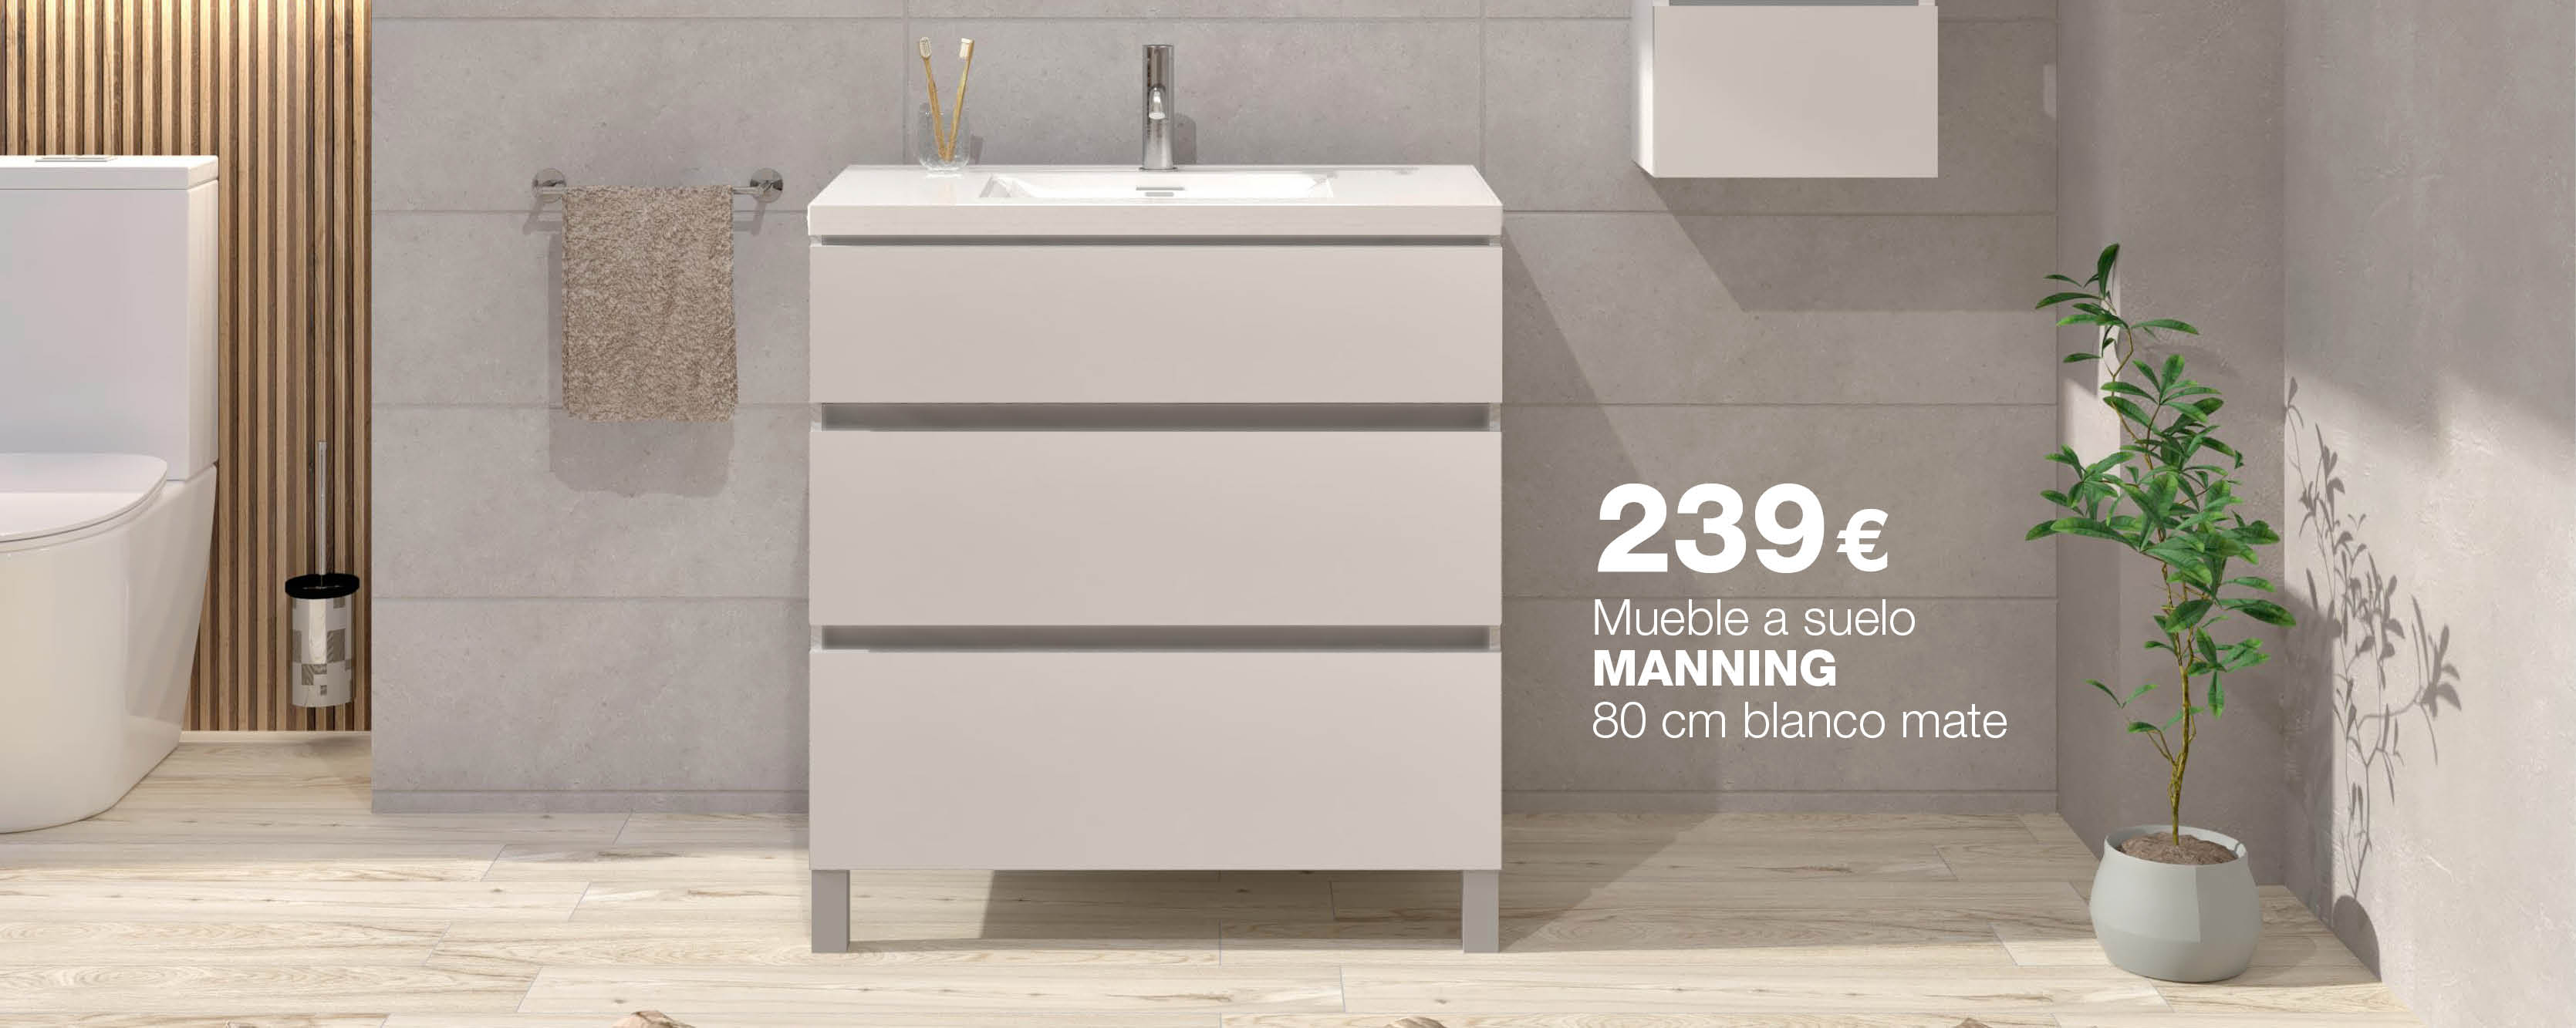 Mueble a suelo Baho MANNING 80 blanco mate